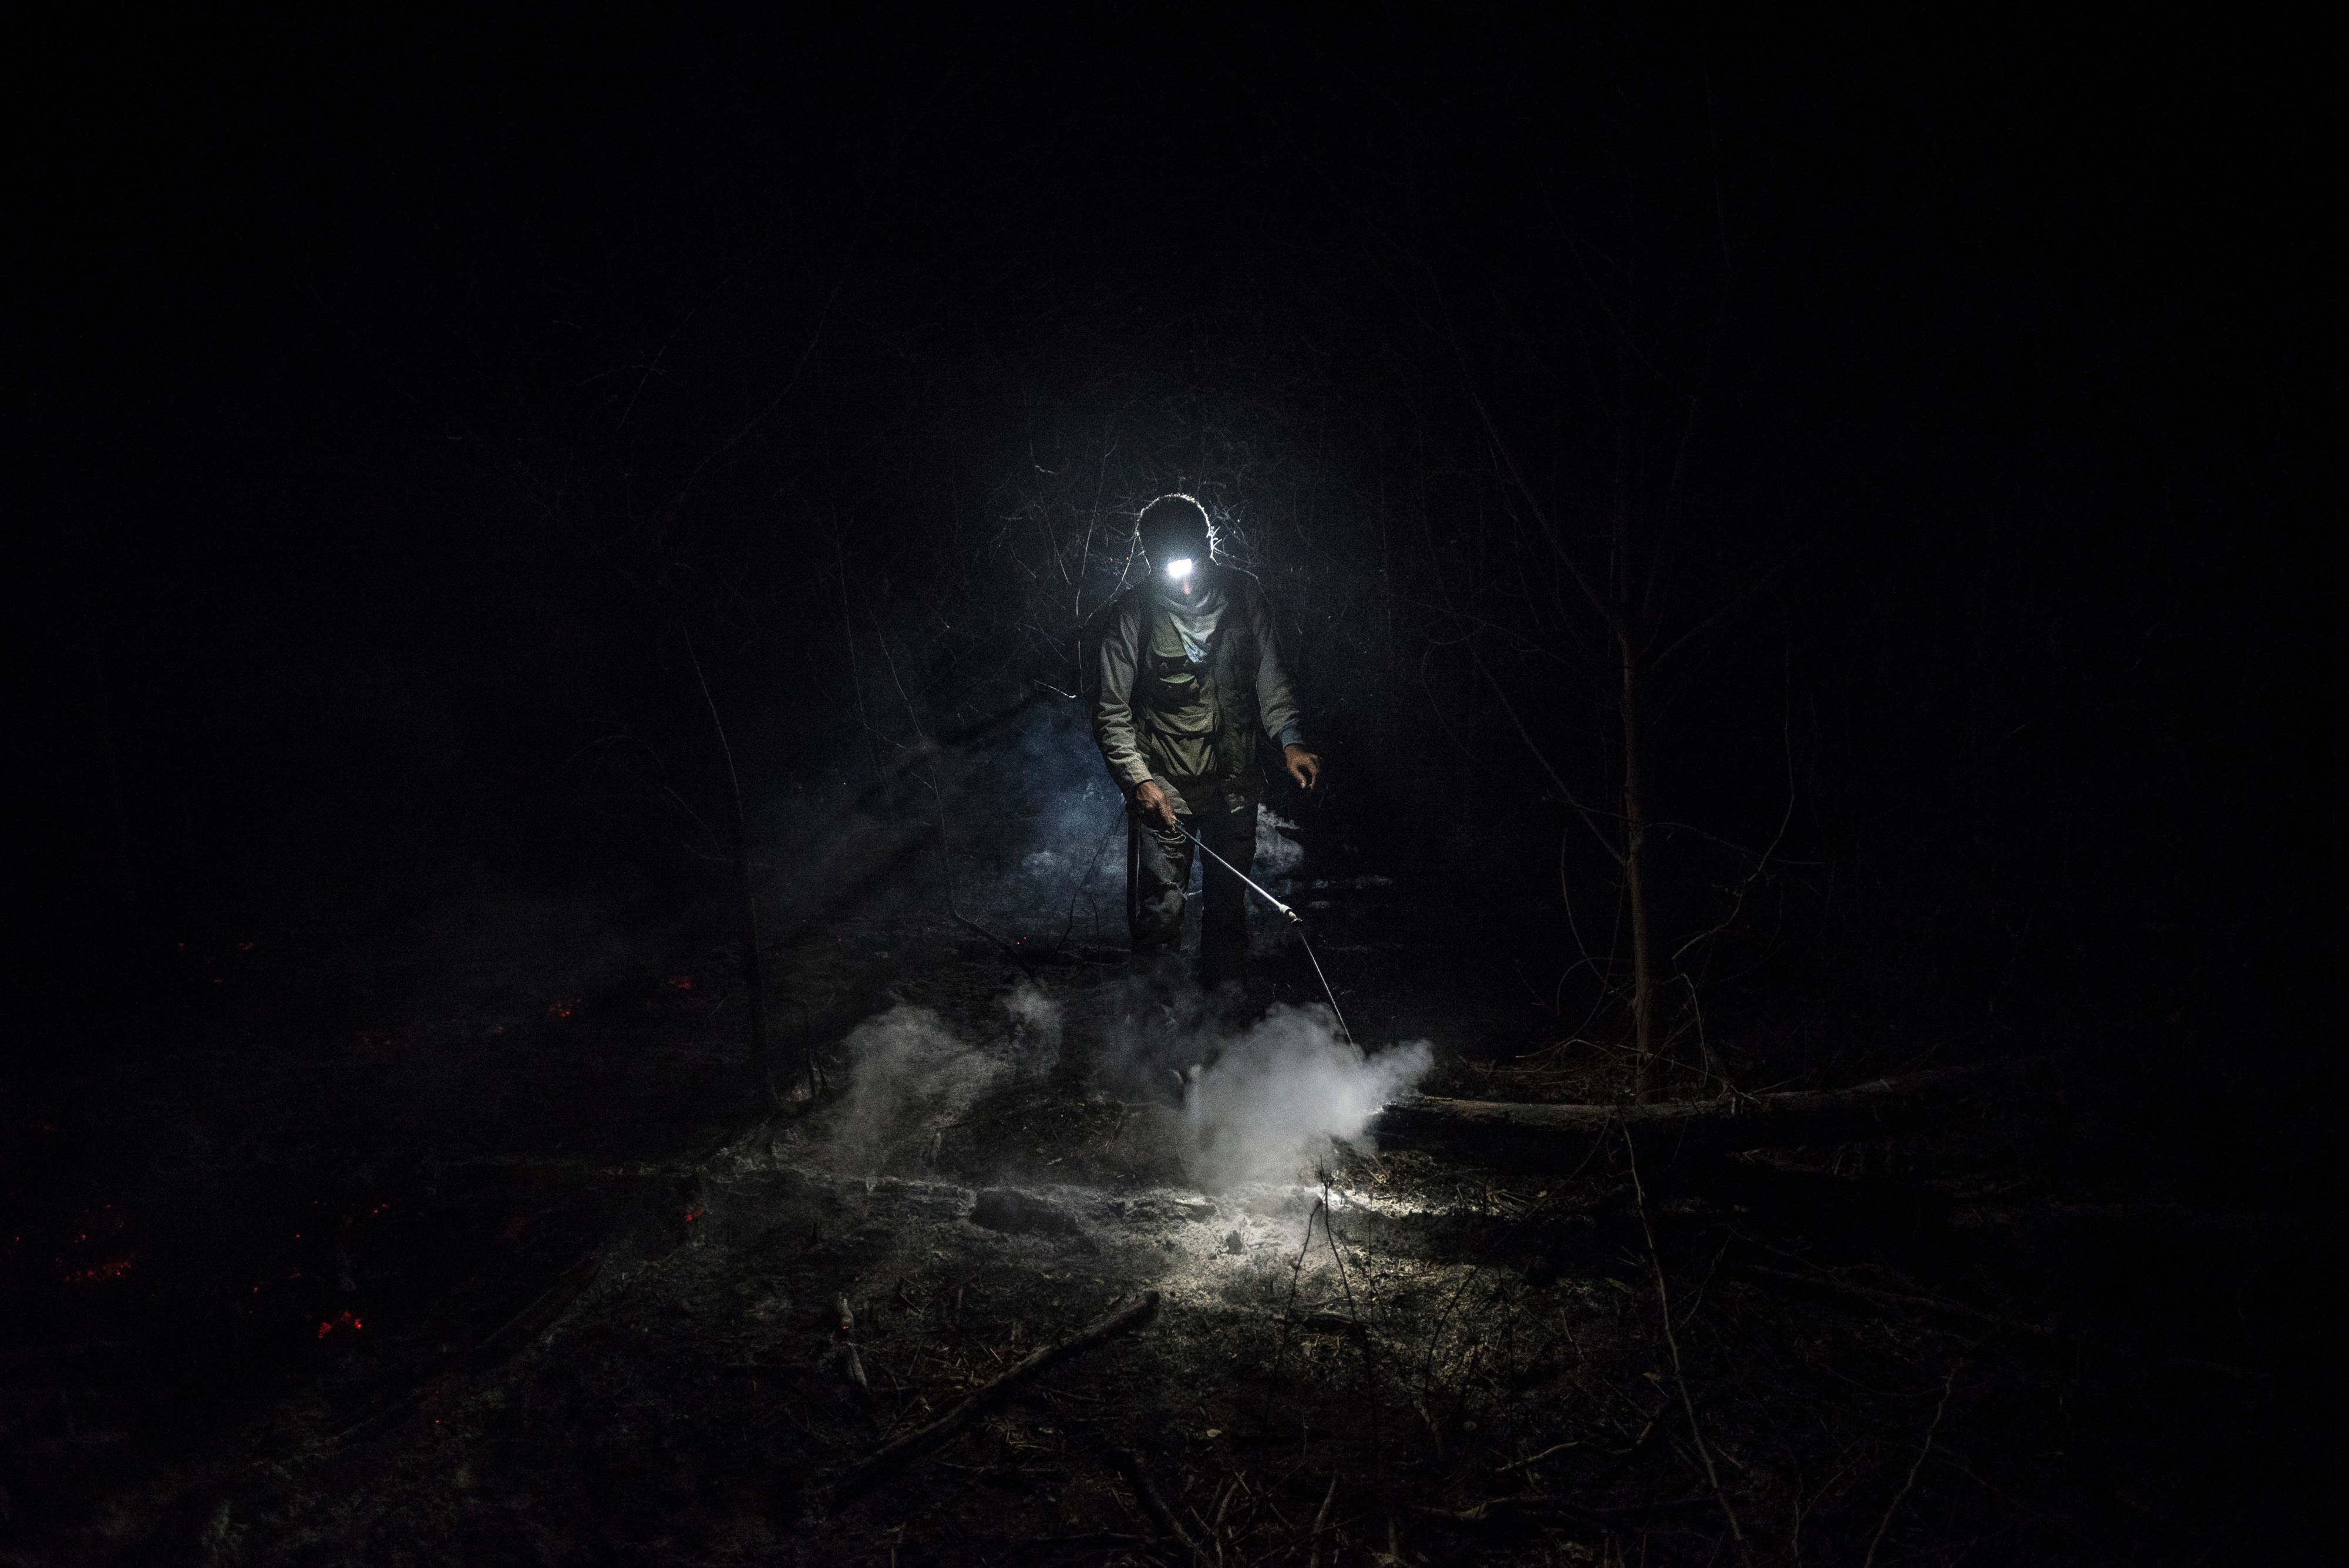 'The Tucabaca’s night'. Volunteer forest firefighter Daniel Vargas Osinaga (21) walks through thick smoke after helping to extinguish a fire in Santa Rosa de Tucabaca, a conservation valley of La Chiquitania dry forests, Southeastern Bolivia, on August 25, 2019. For nearly three months, hundreds of firefighters and volunteers worked under extreme temperatures trying to put out the fires that burned more than 5.3 M hectares. © Marcelo Perez del Carpio/TNC Photo Contest